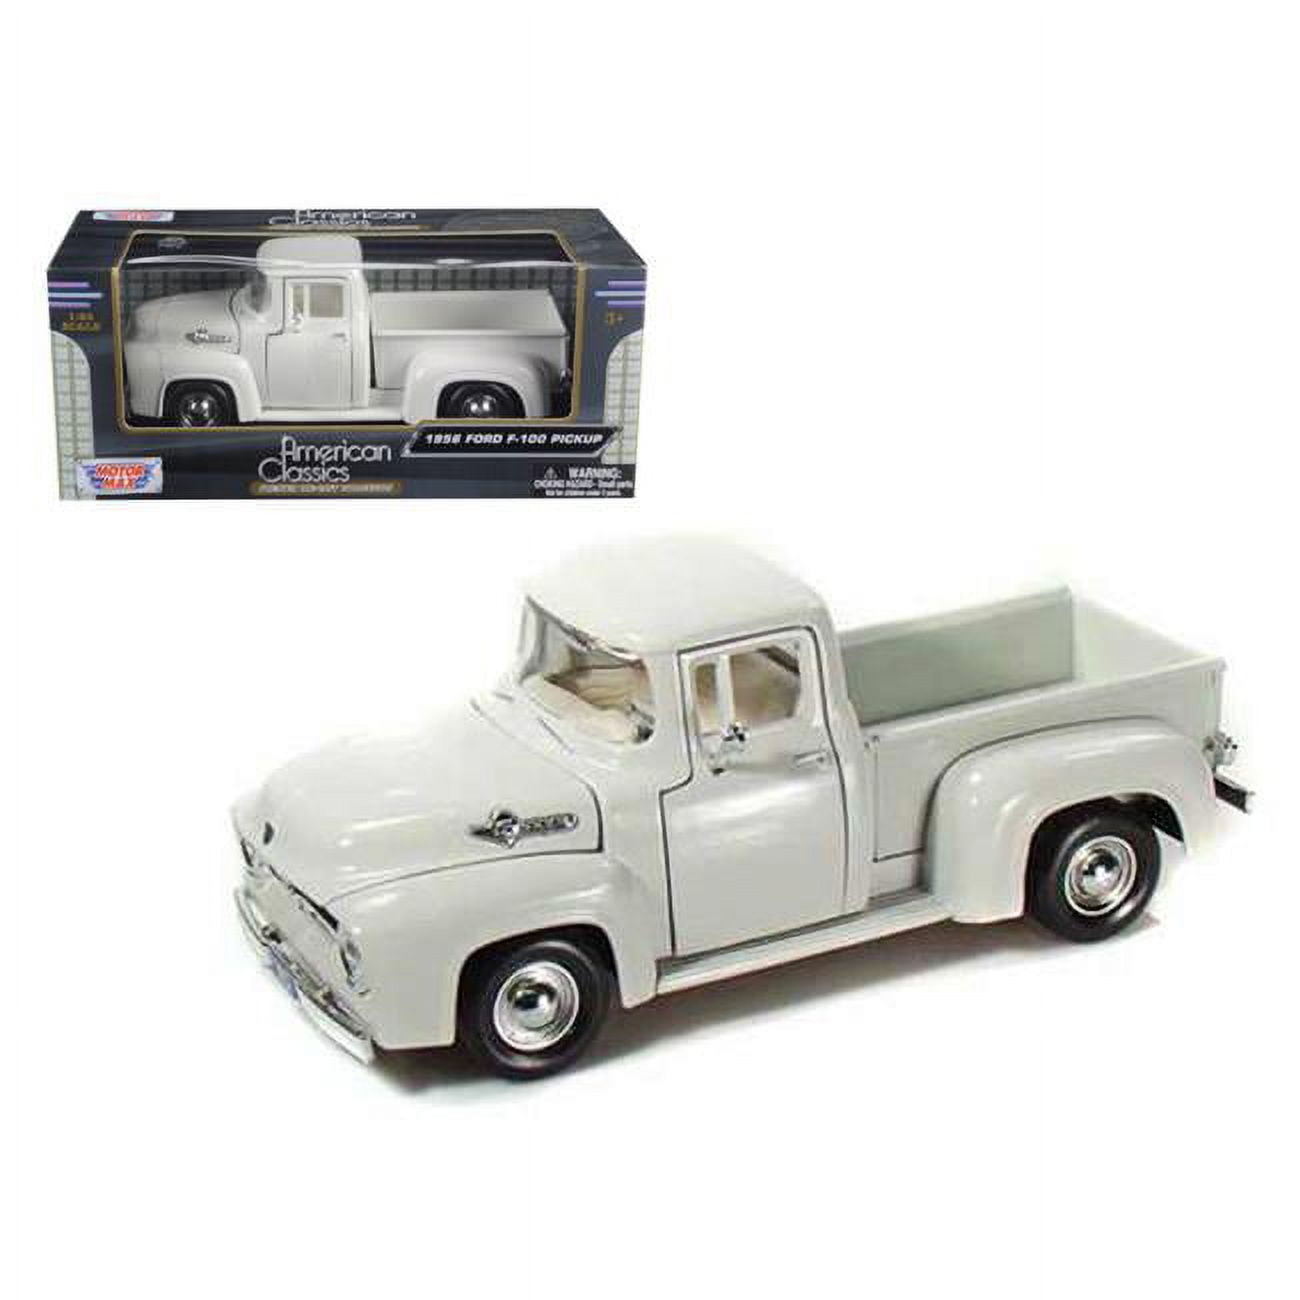 73235w 1 by 24 1956 Ford F-100 Pickup Diecast Car Model - White -  MOTORMAX